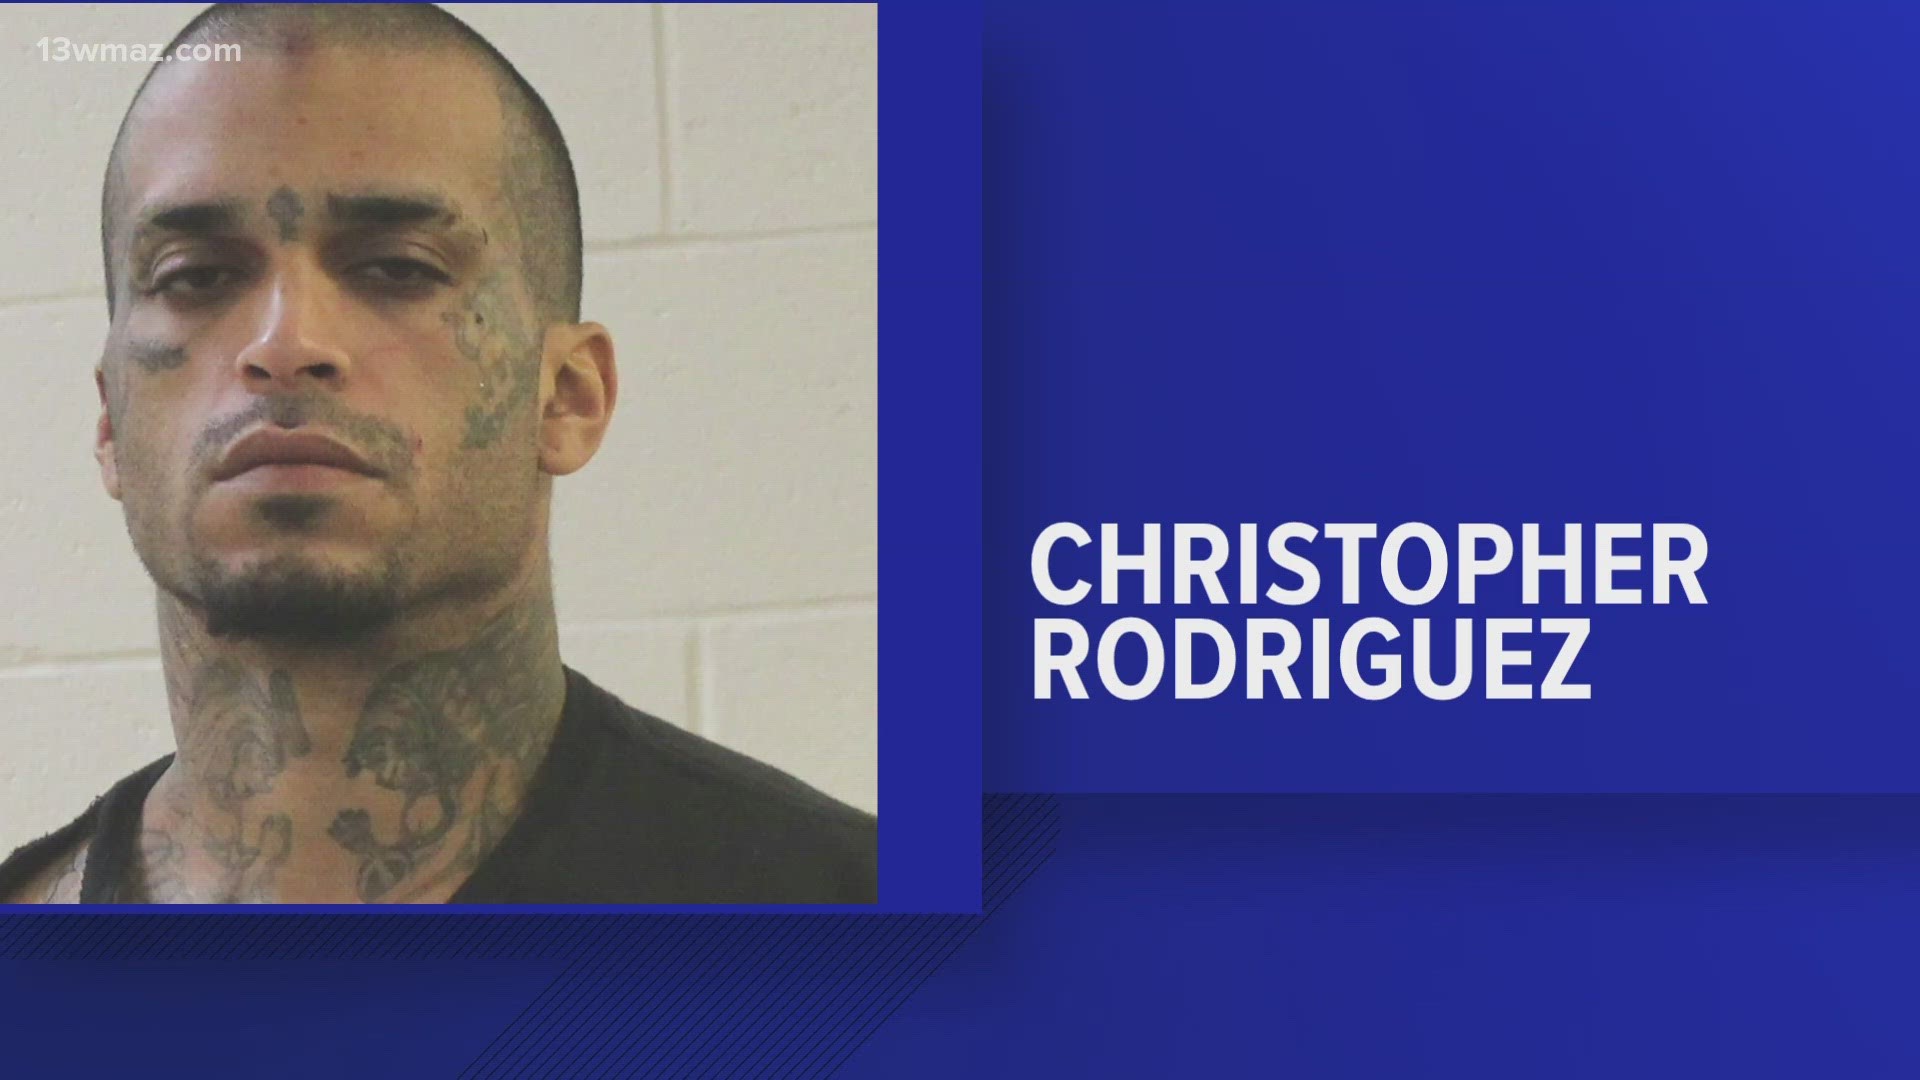 33-year-old Christopher Rodriguez was sentenced to 40 years, with the first 35 years to be served in prison and the remaining 5 years to be served on probation.